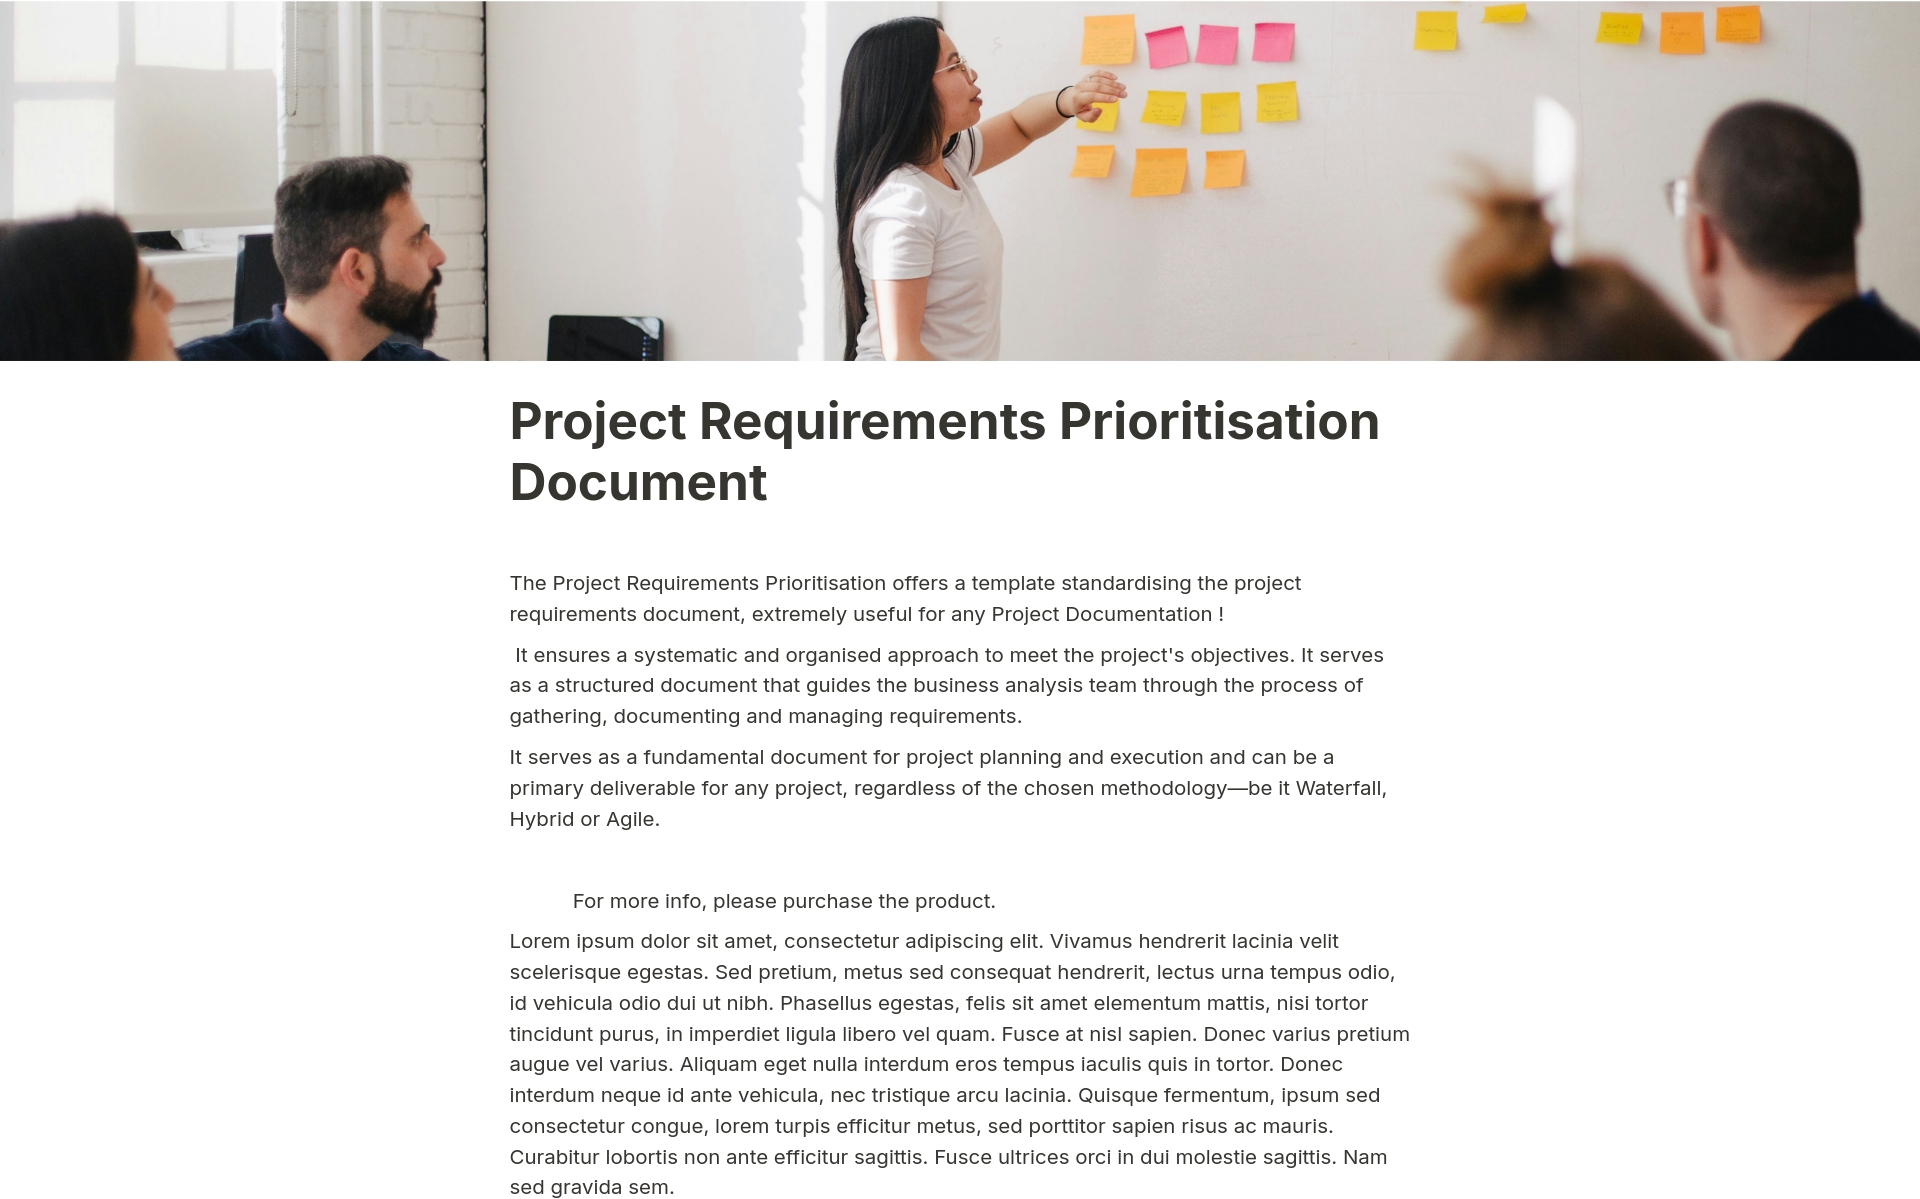 A professional and essential easy to use model for simply prioritising Project Requirements for every need : from Sprint allocation, to iterations or quick Releases.